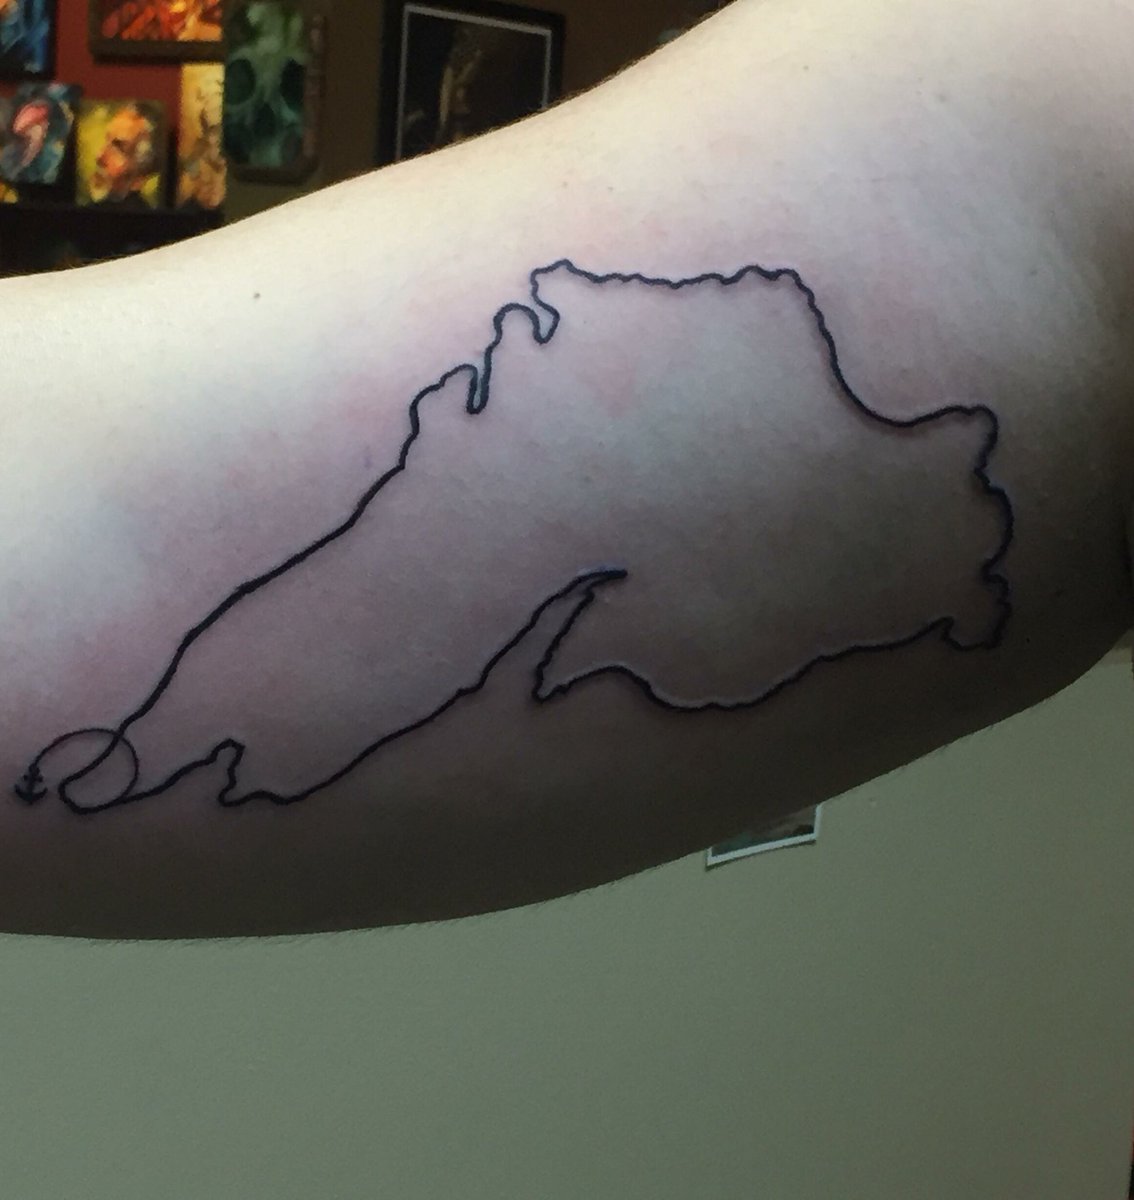 Buy Lake Superior Outline Temporary Tattoo Sticker set of 2 Online in India   Etsy